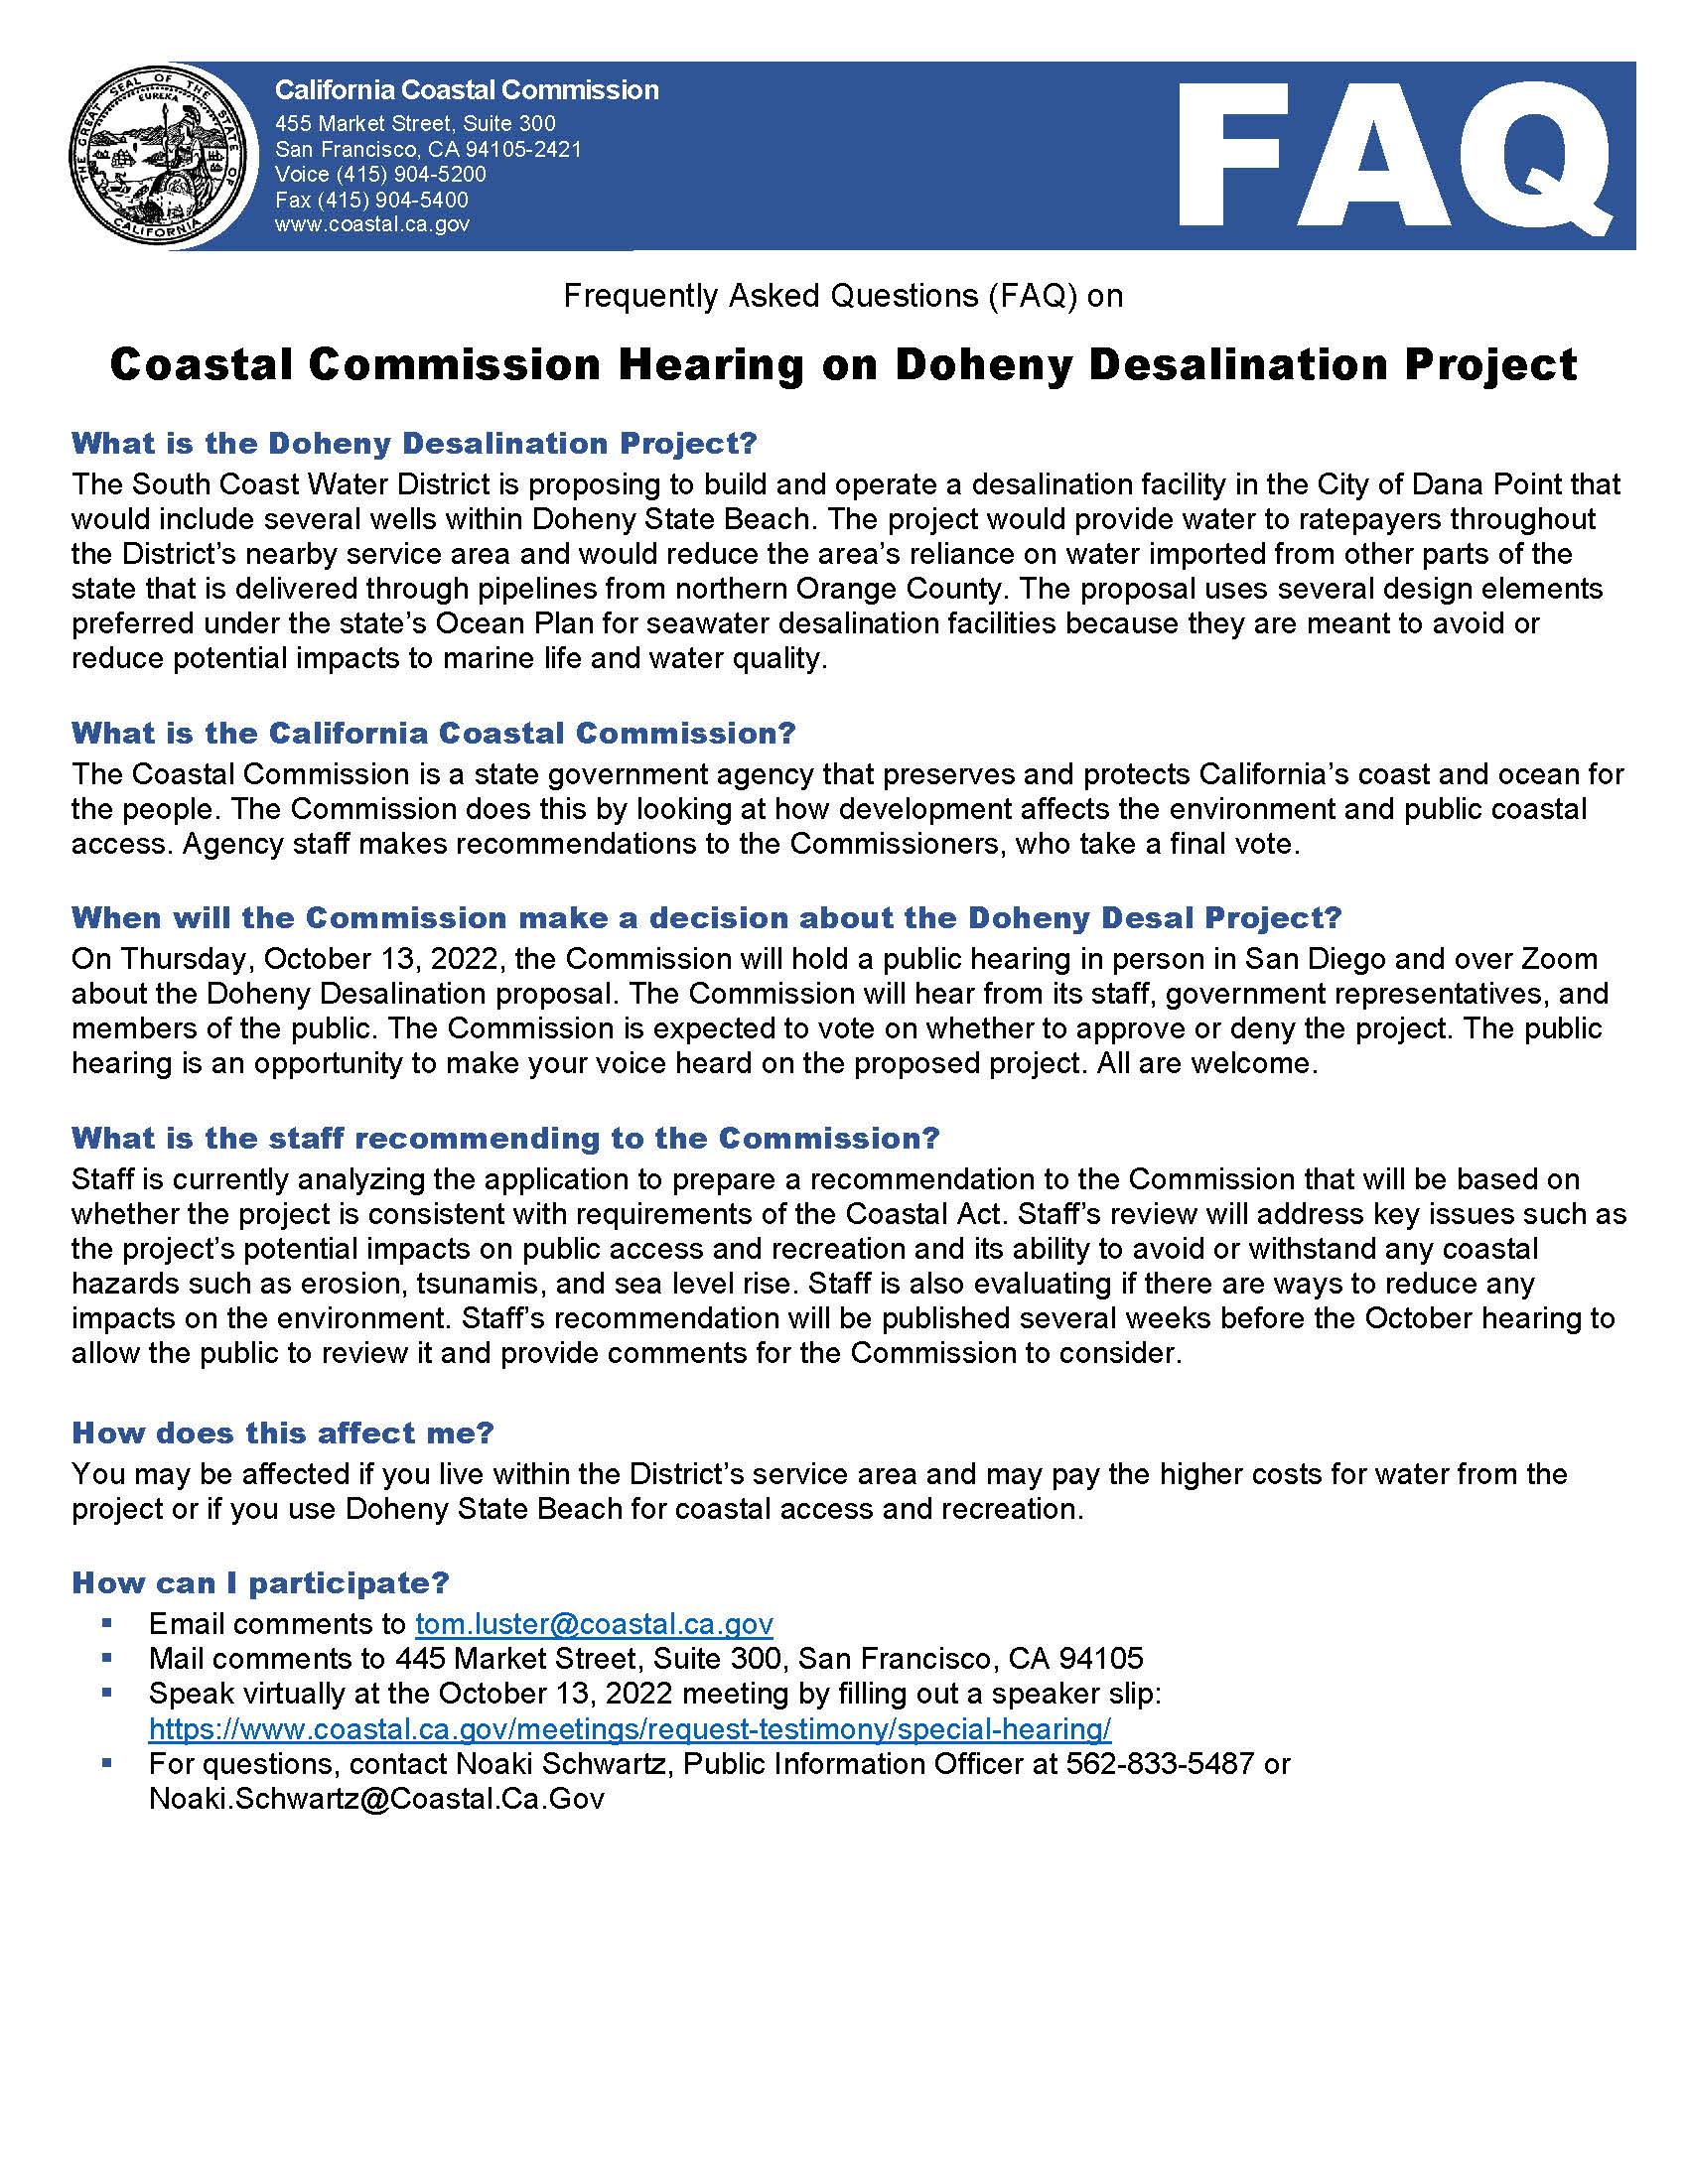 Doheny Desalination Project